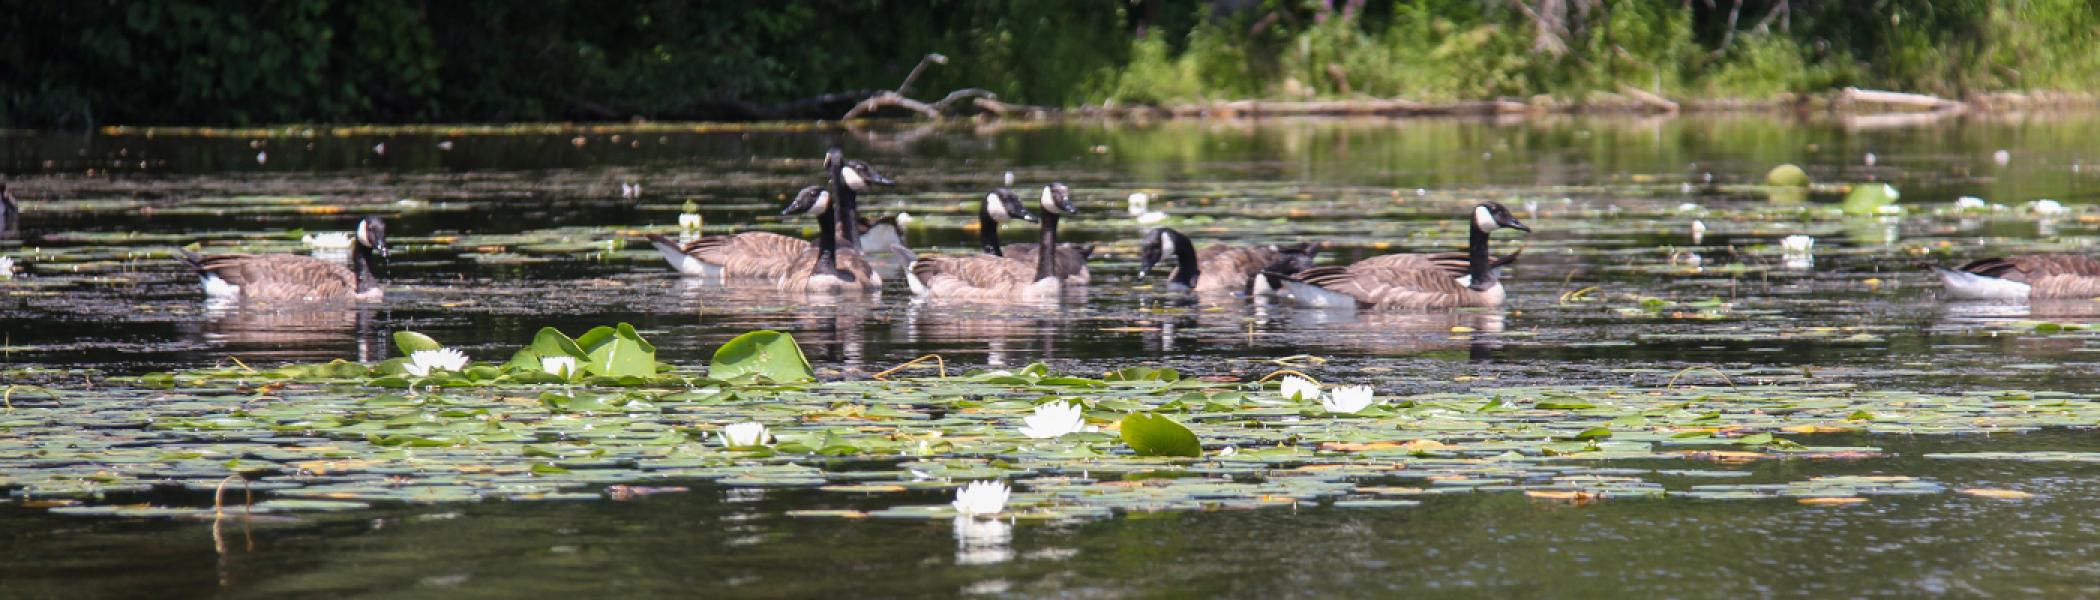 A group of canada geese swimming in a river surrounded by lilly pads